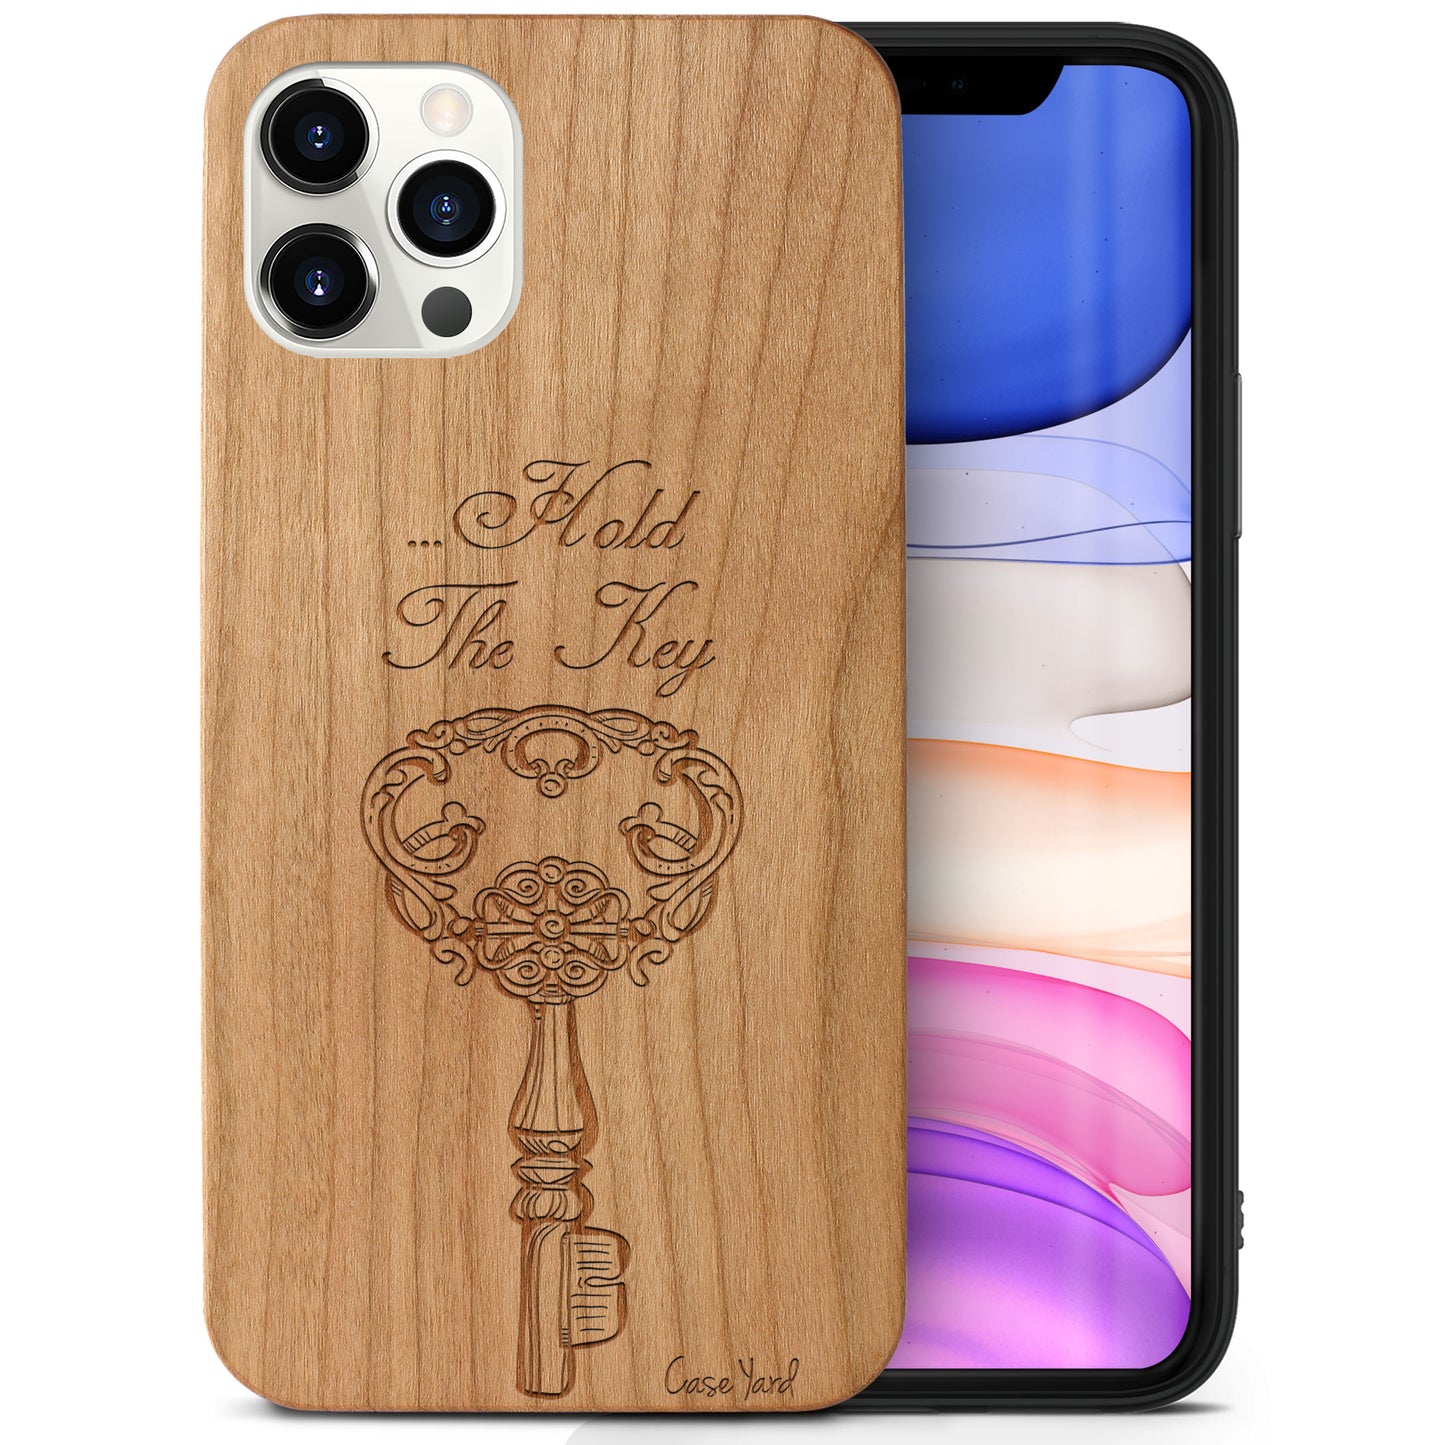 Wooden Cell Phone Case Cover, Laser Engraved case for iPhone & Samsung phone Hold The Key Design